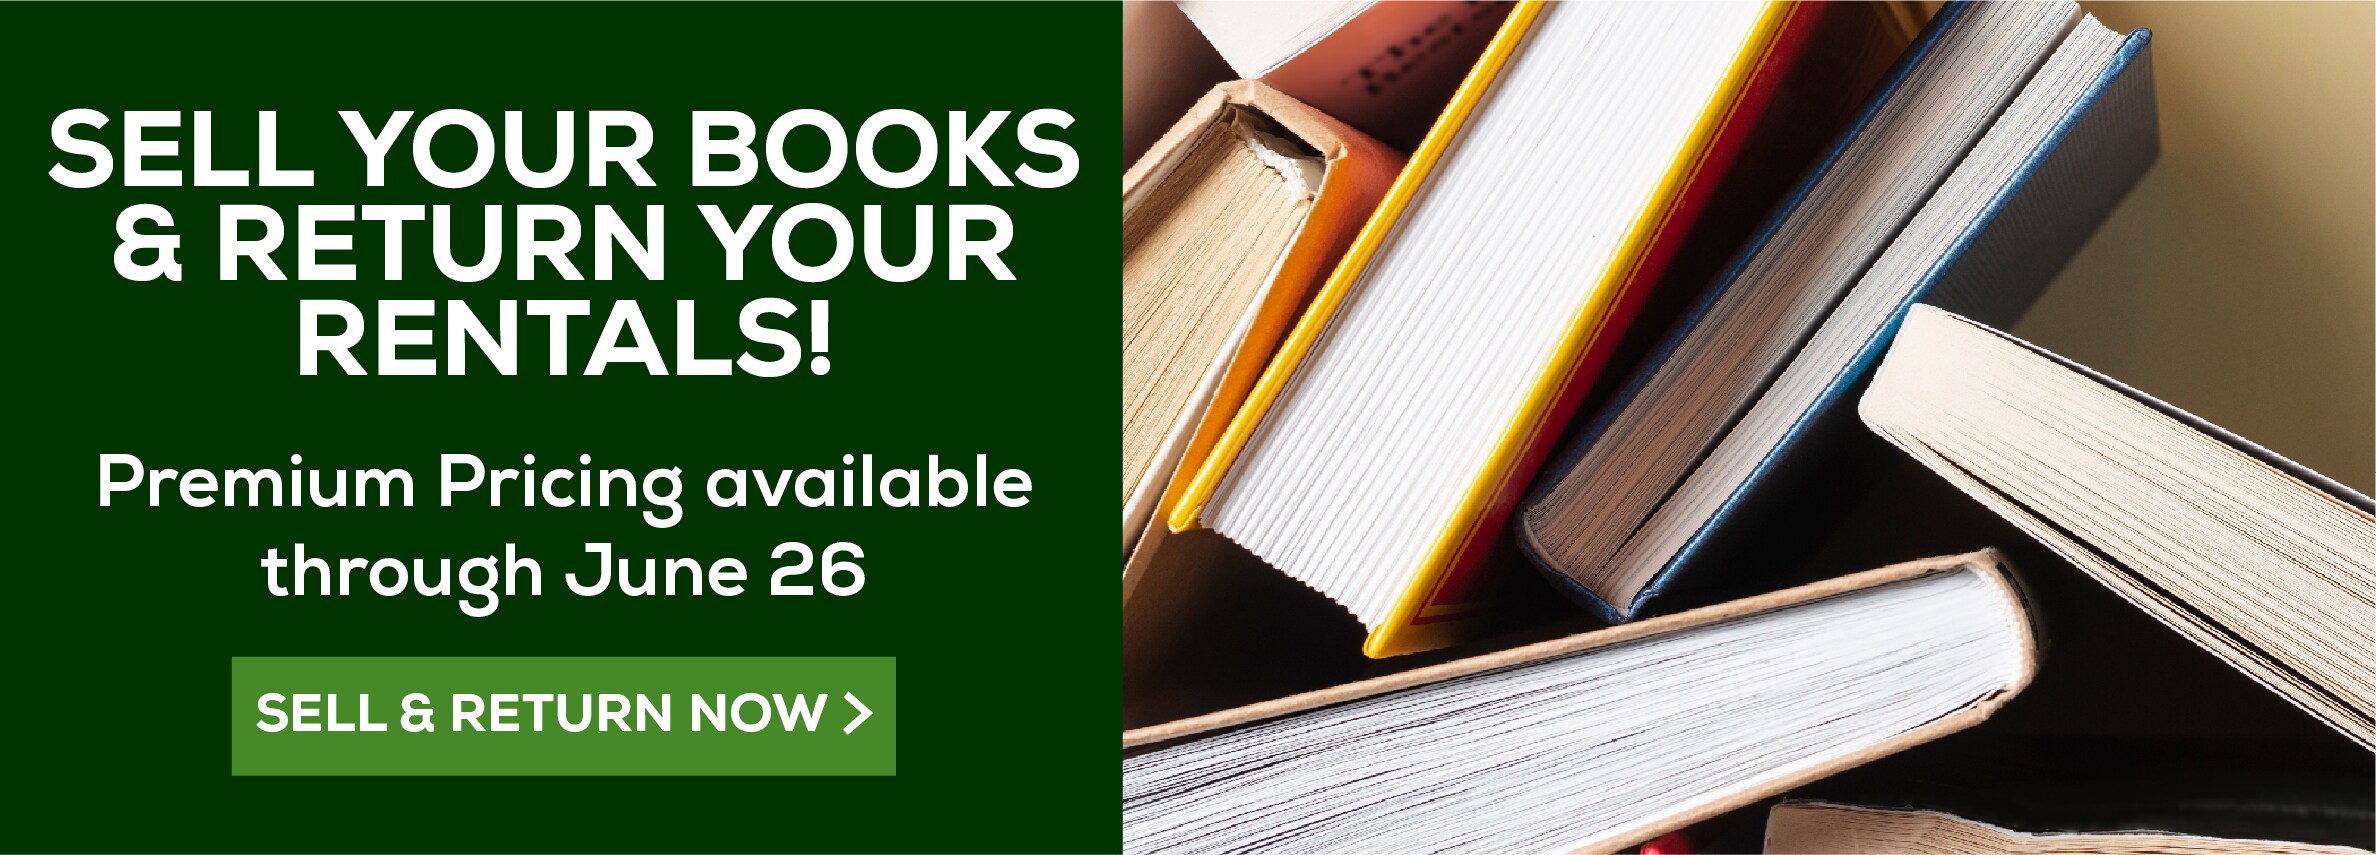 Sell Your Textbooks! Premium pricing available through June 26. Sell Now!